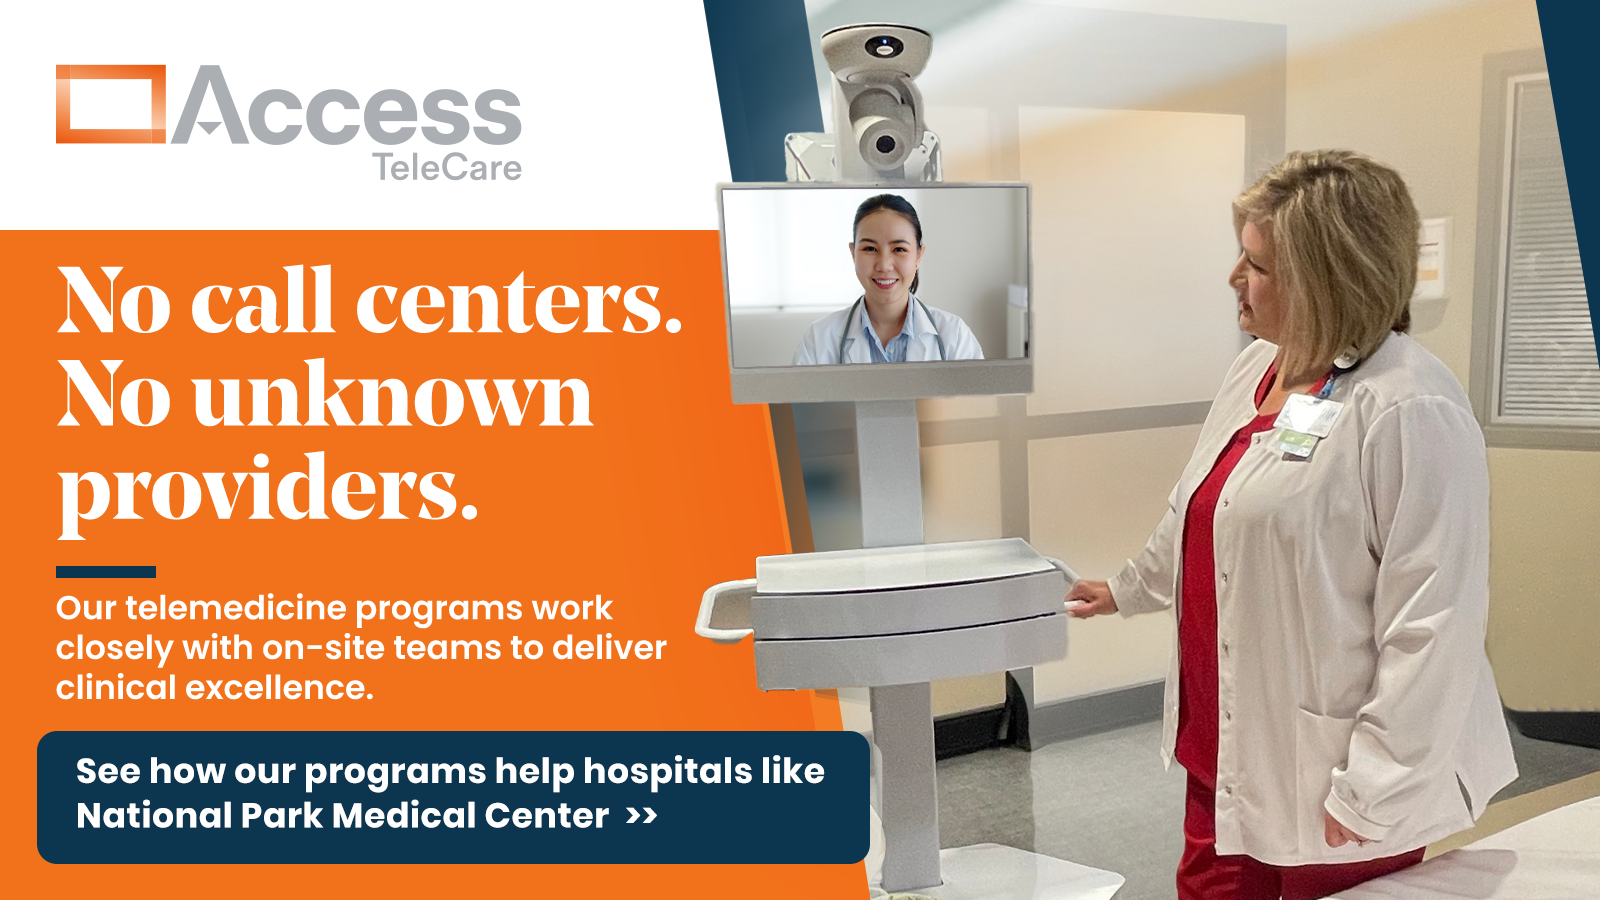 Access TeleCare telemedicine programs work closely with on-site teams to deliver clinical excellence. See how